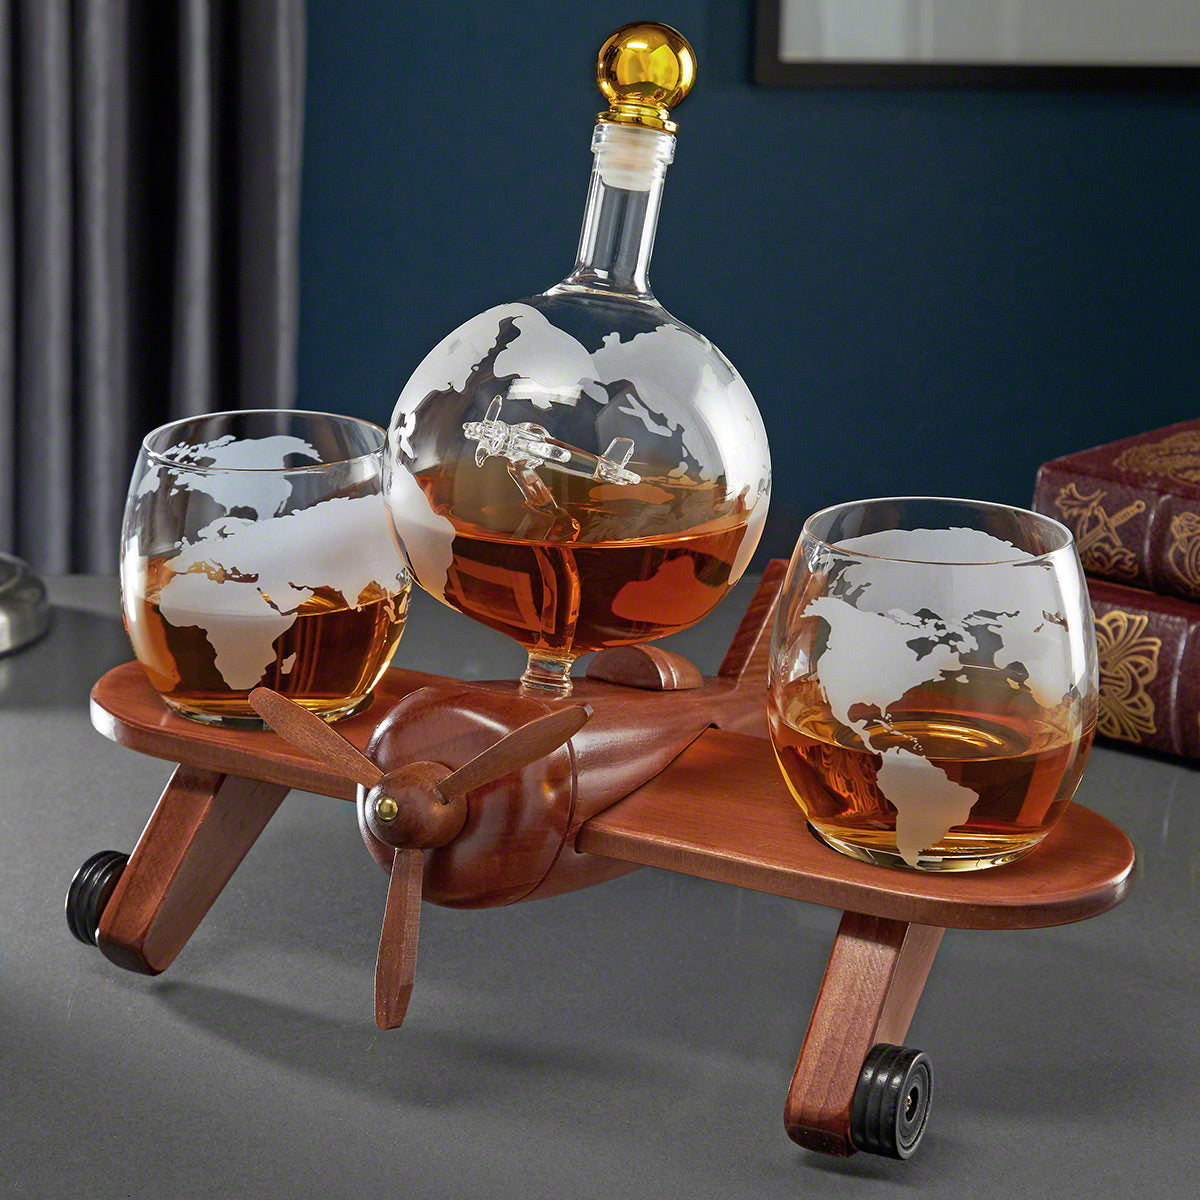 Airplane Whiskey Decanter Set with Globe Glasses